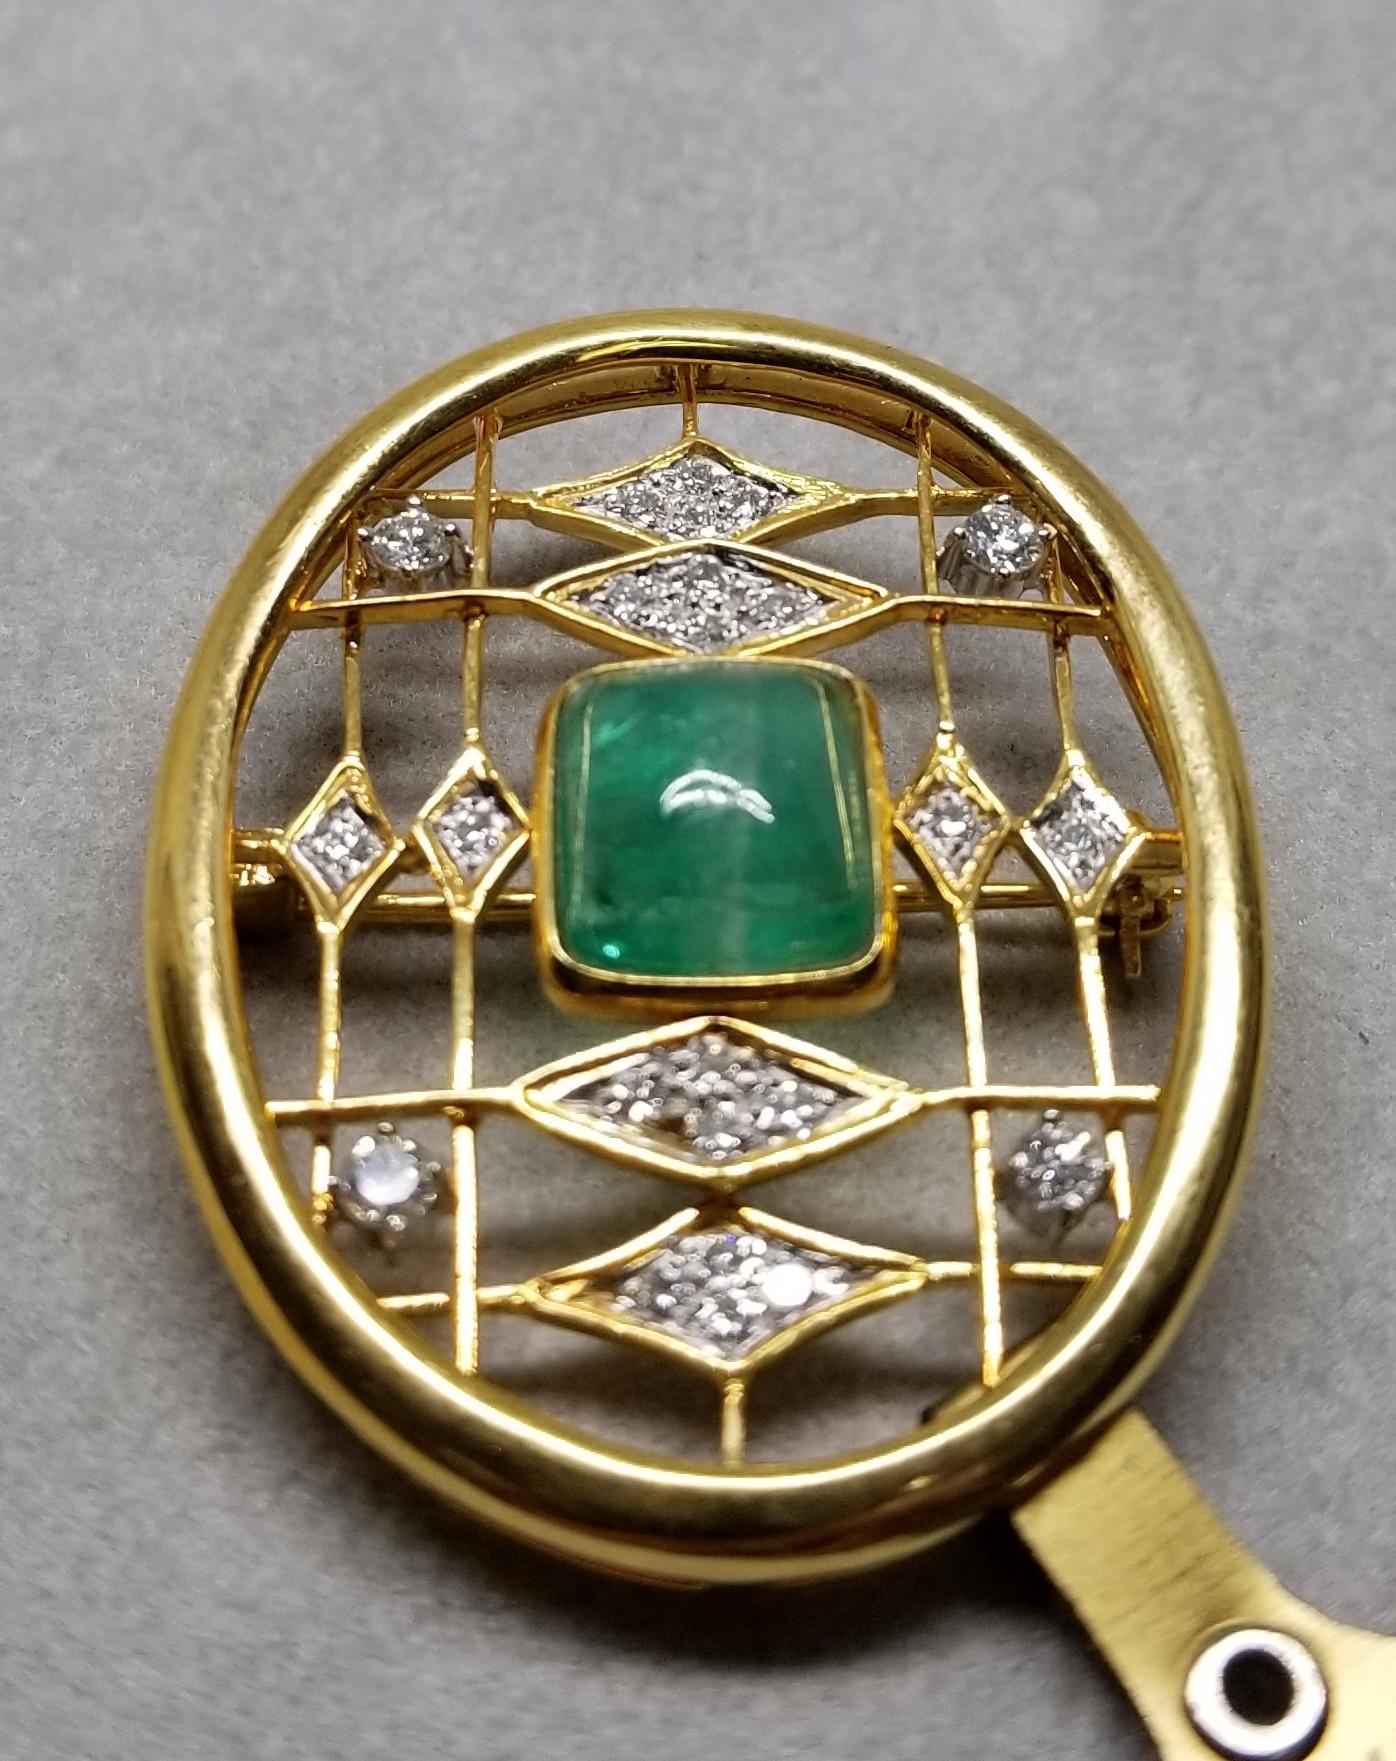 This piece of fine jewelry was designed and hand crafted by “Moshi” of New York, it was found in a vault from an estate sale and was never used.  14k emerald and diamond pin containing 1 cushion cut cabochon emerald weighing 2.67cts. and 24 round